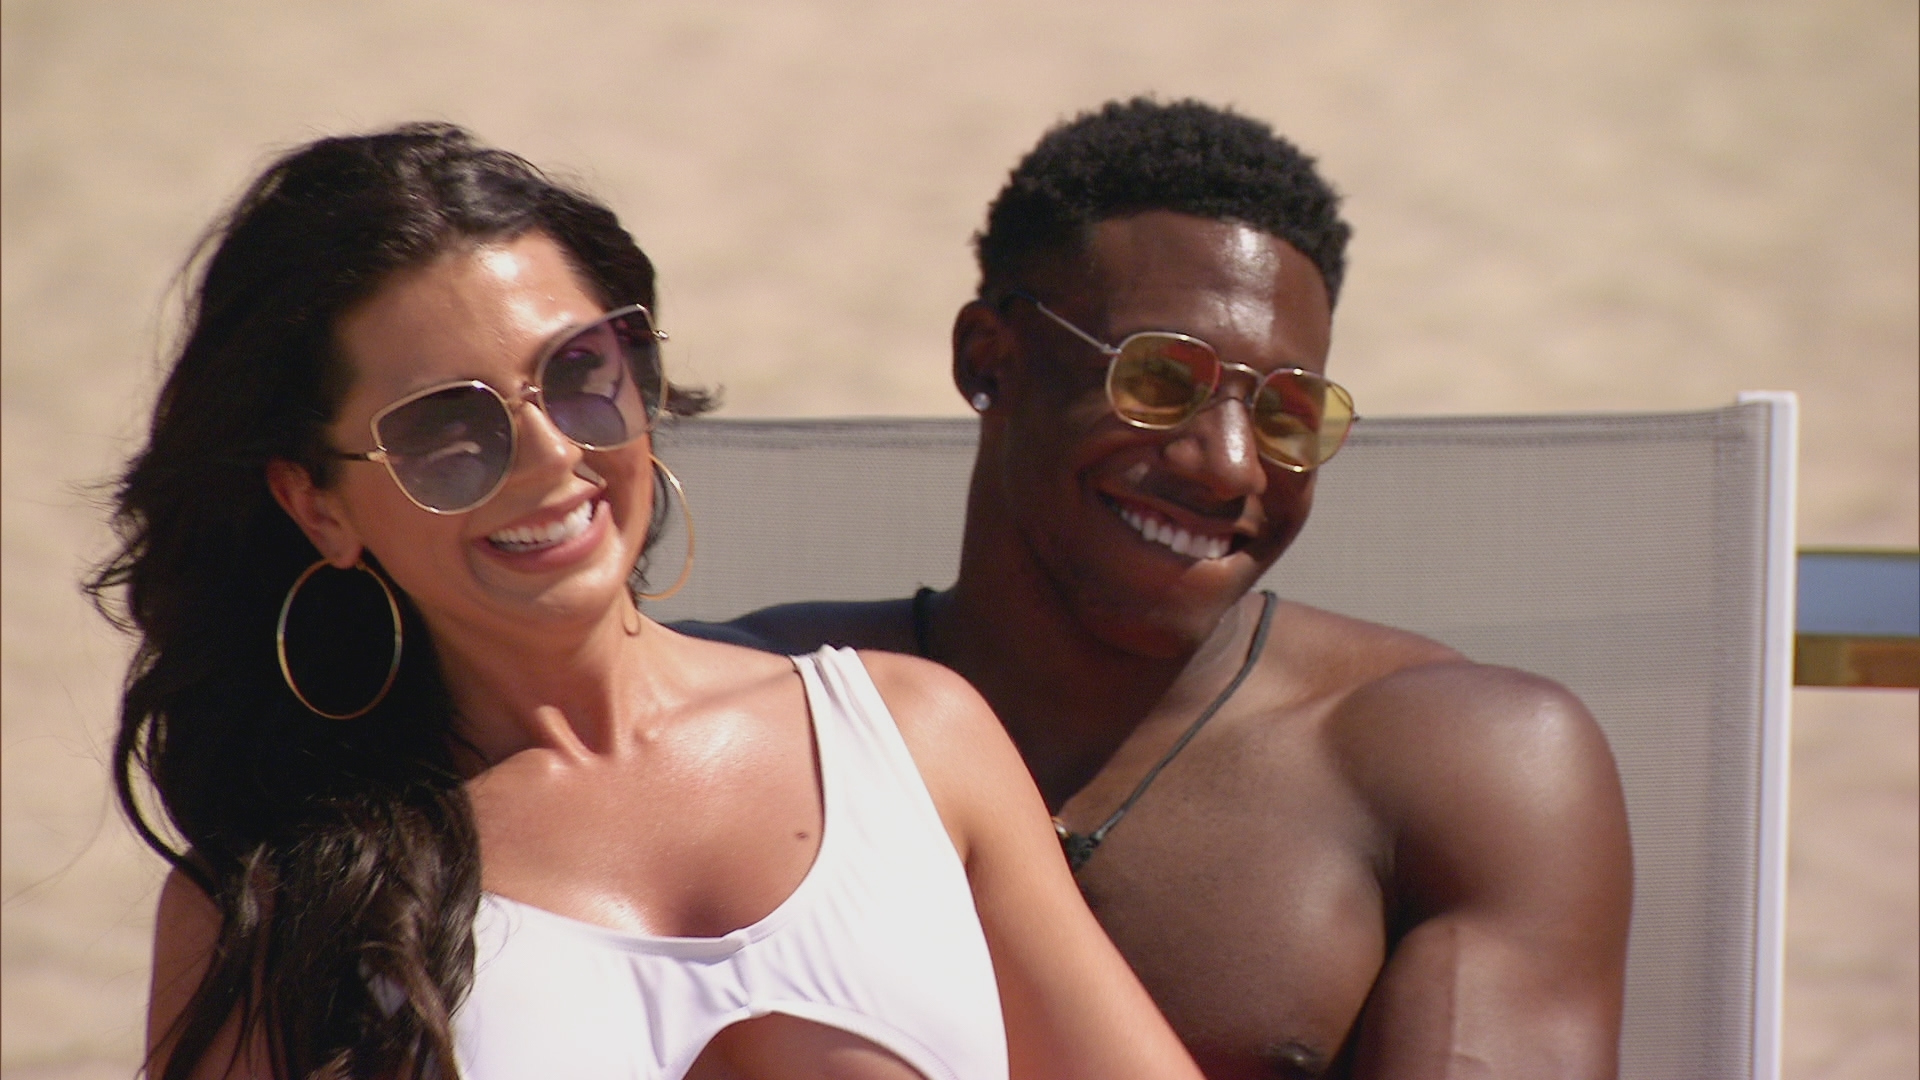 Watch Ex on the Beach Season Episode 1: Welcome to Ex on the Beach Full  show on Paramount Plus